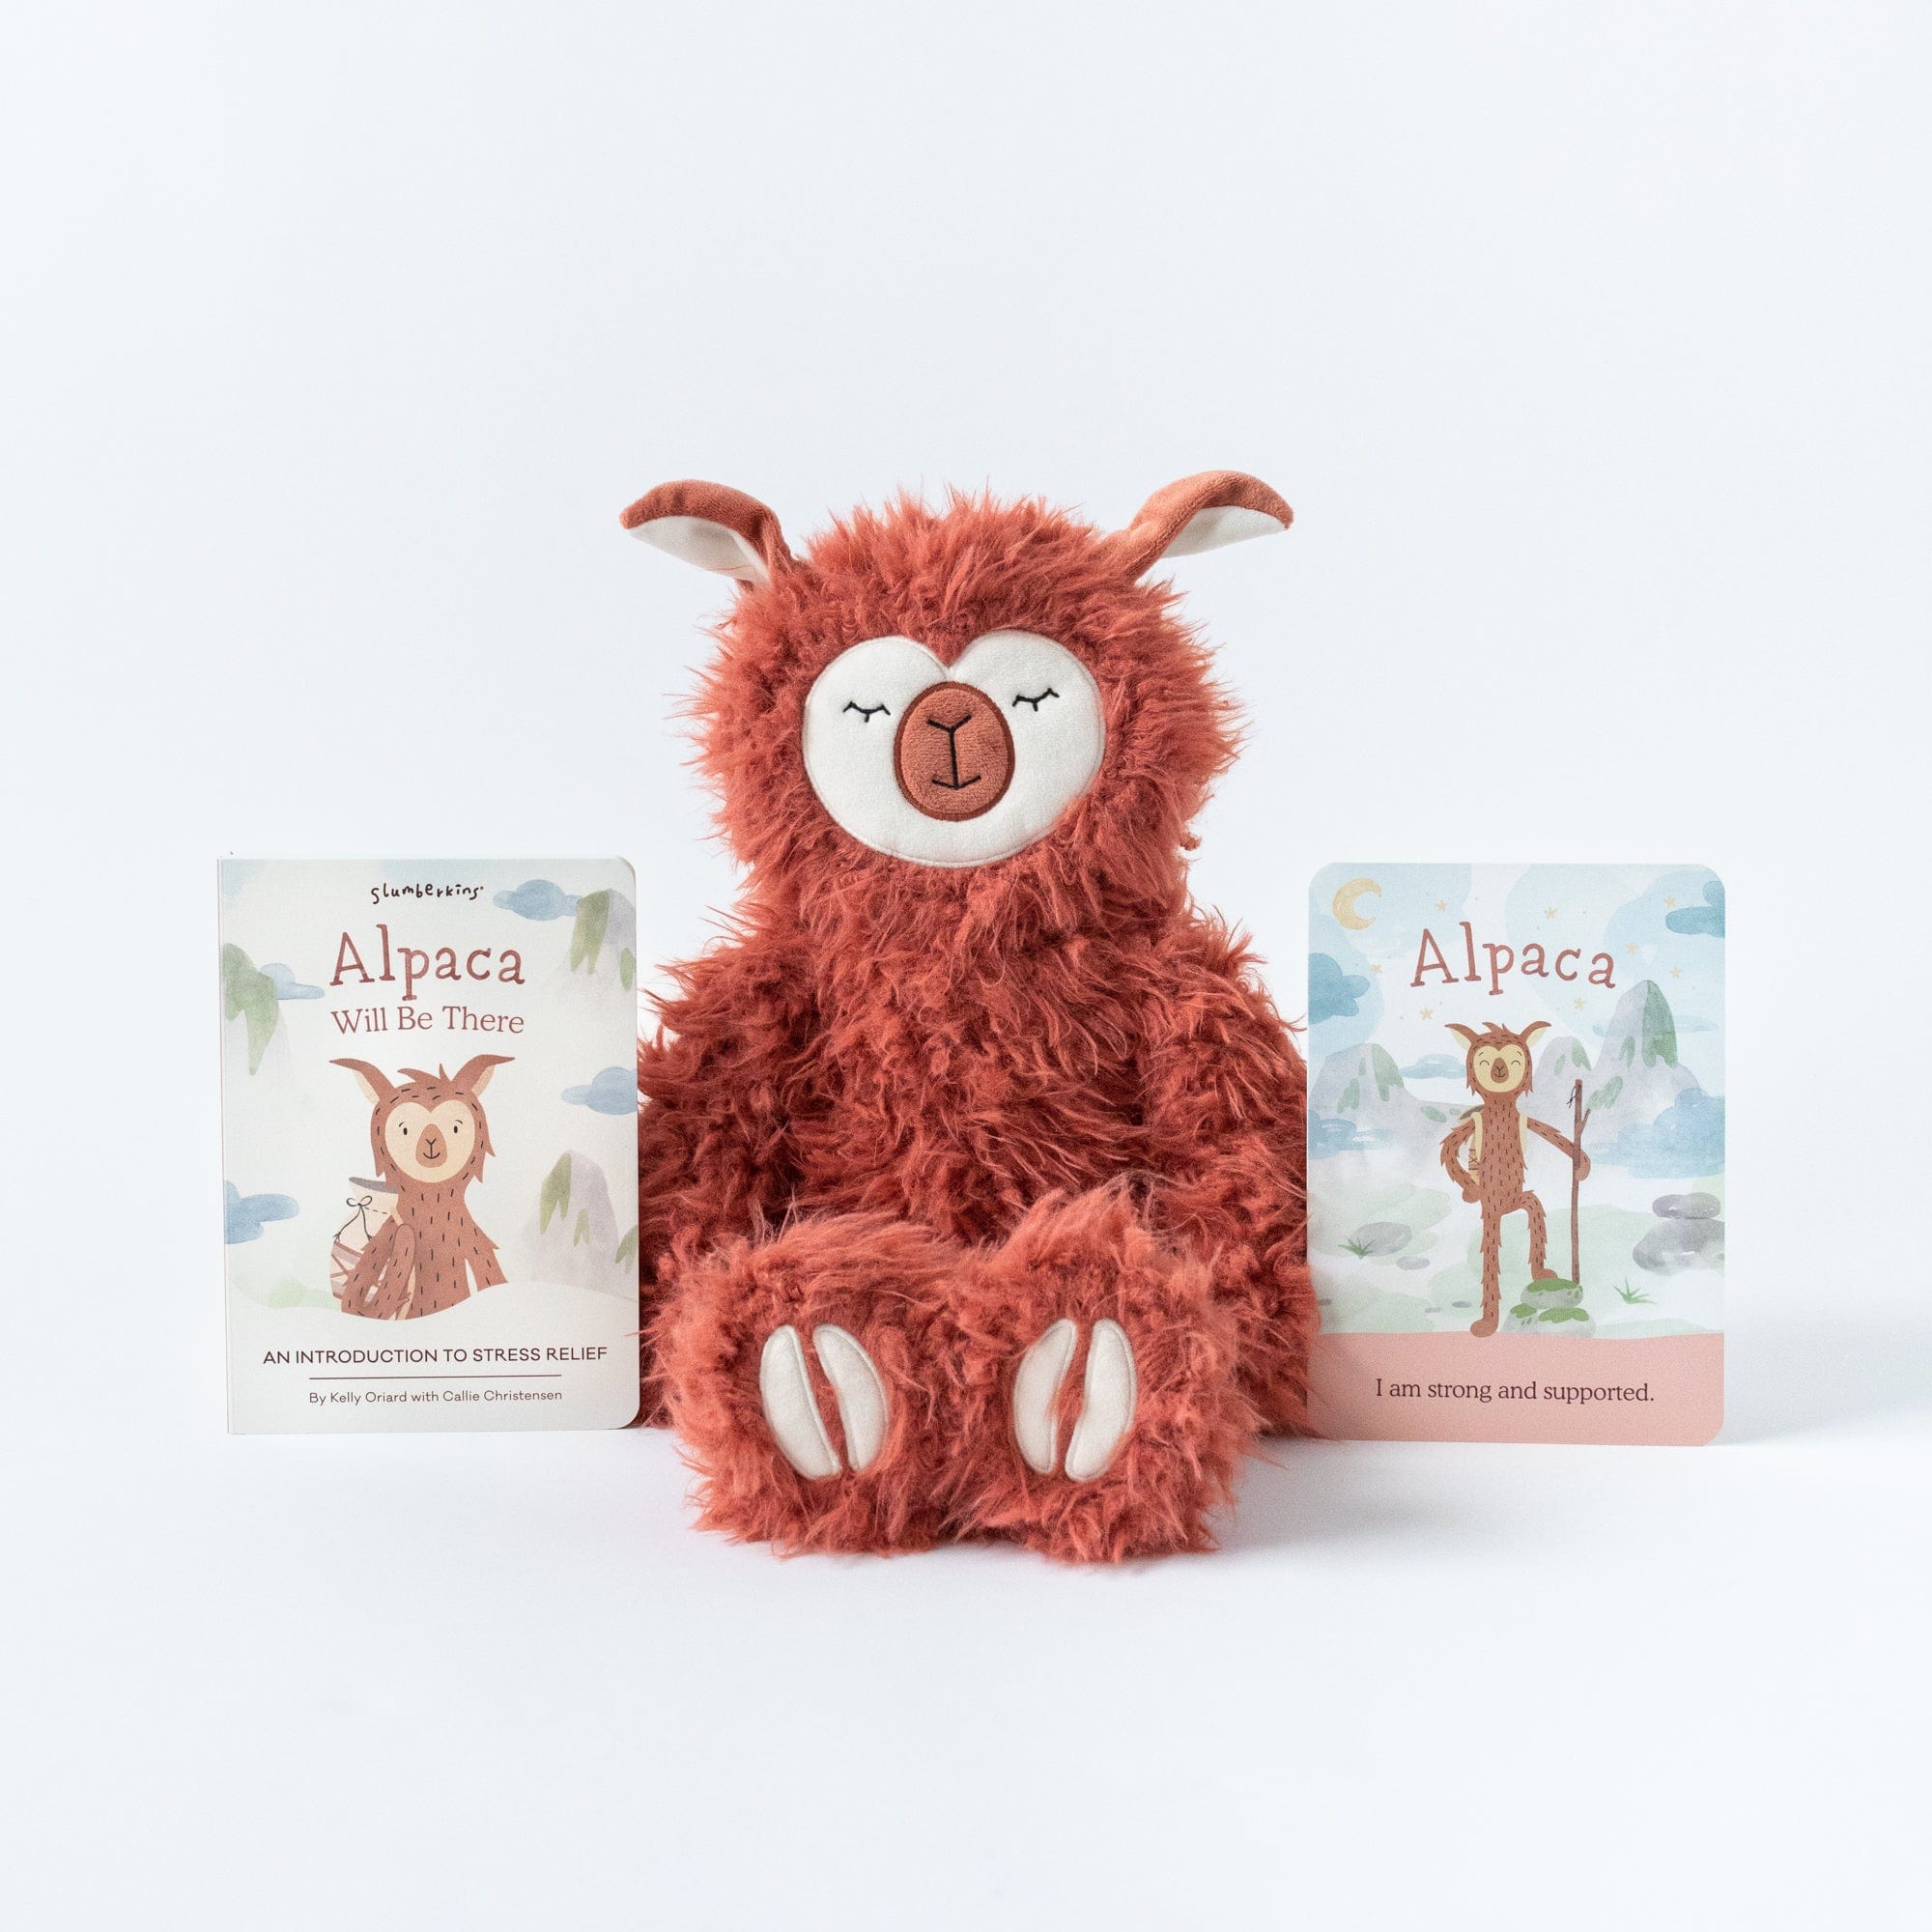 Ultra-plush Alpaca Stuffed Animal with Alpaca Will Be There Board Book and Affirmation Card - View Product